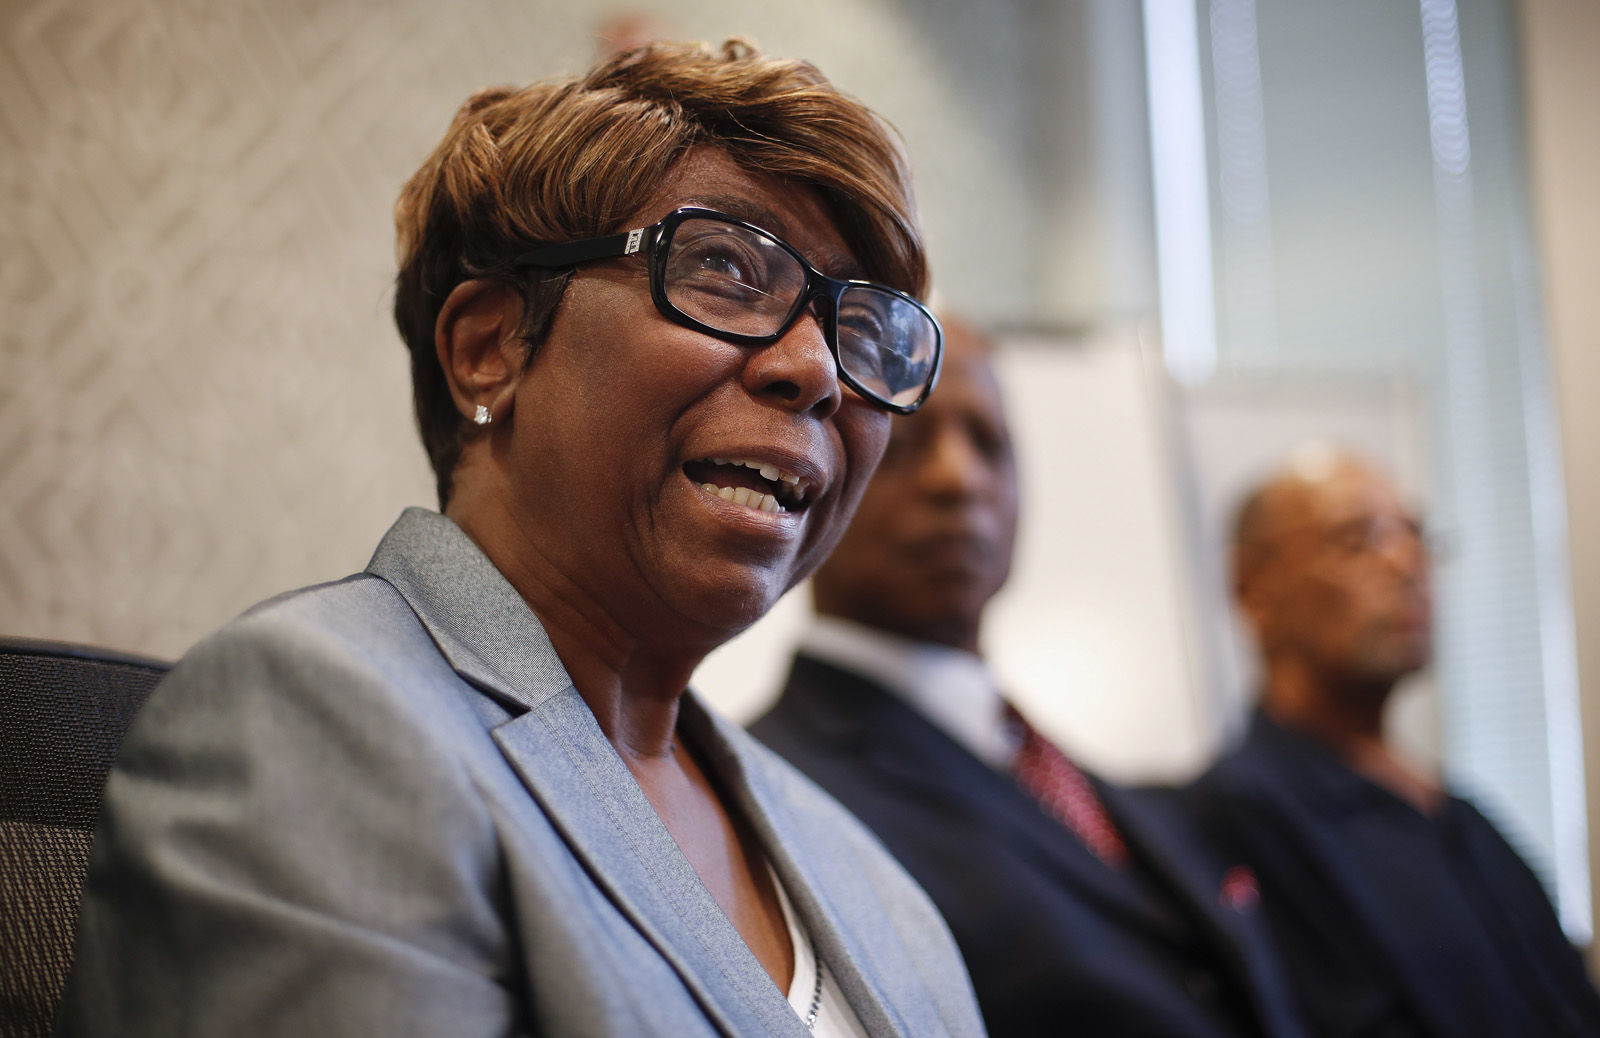 Barbara Butler, accompanied by her husband Phillip, speaks during a news conference at their attorney's office in Washington, Wednesday, Aug. 23, 2017. The Butlers, victims of a cross burning on their property forty years ago, is questioning the sincerity of Catholic Priest William Aitcheson, a Ku Klux Klan "wizard", who has come forward after decades about his past. (AP Photo/Pablo Martinez Monsivais)